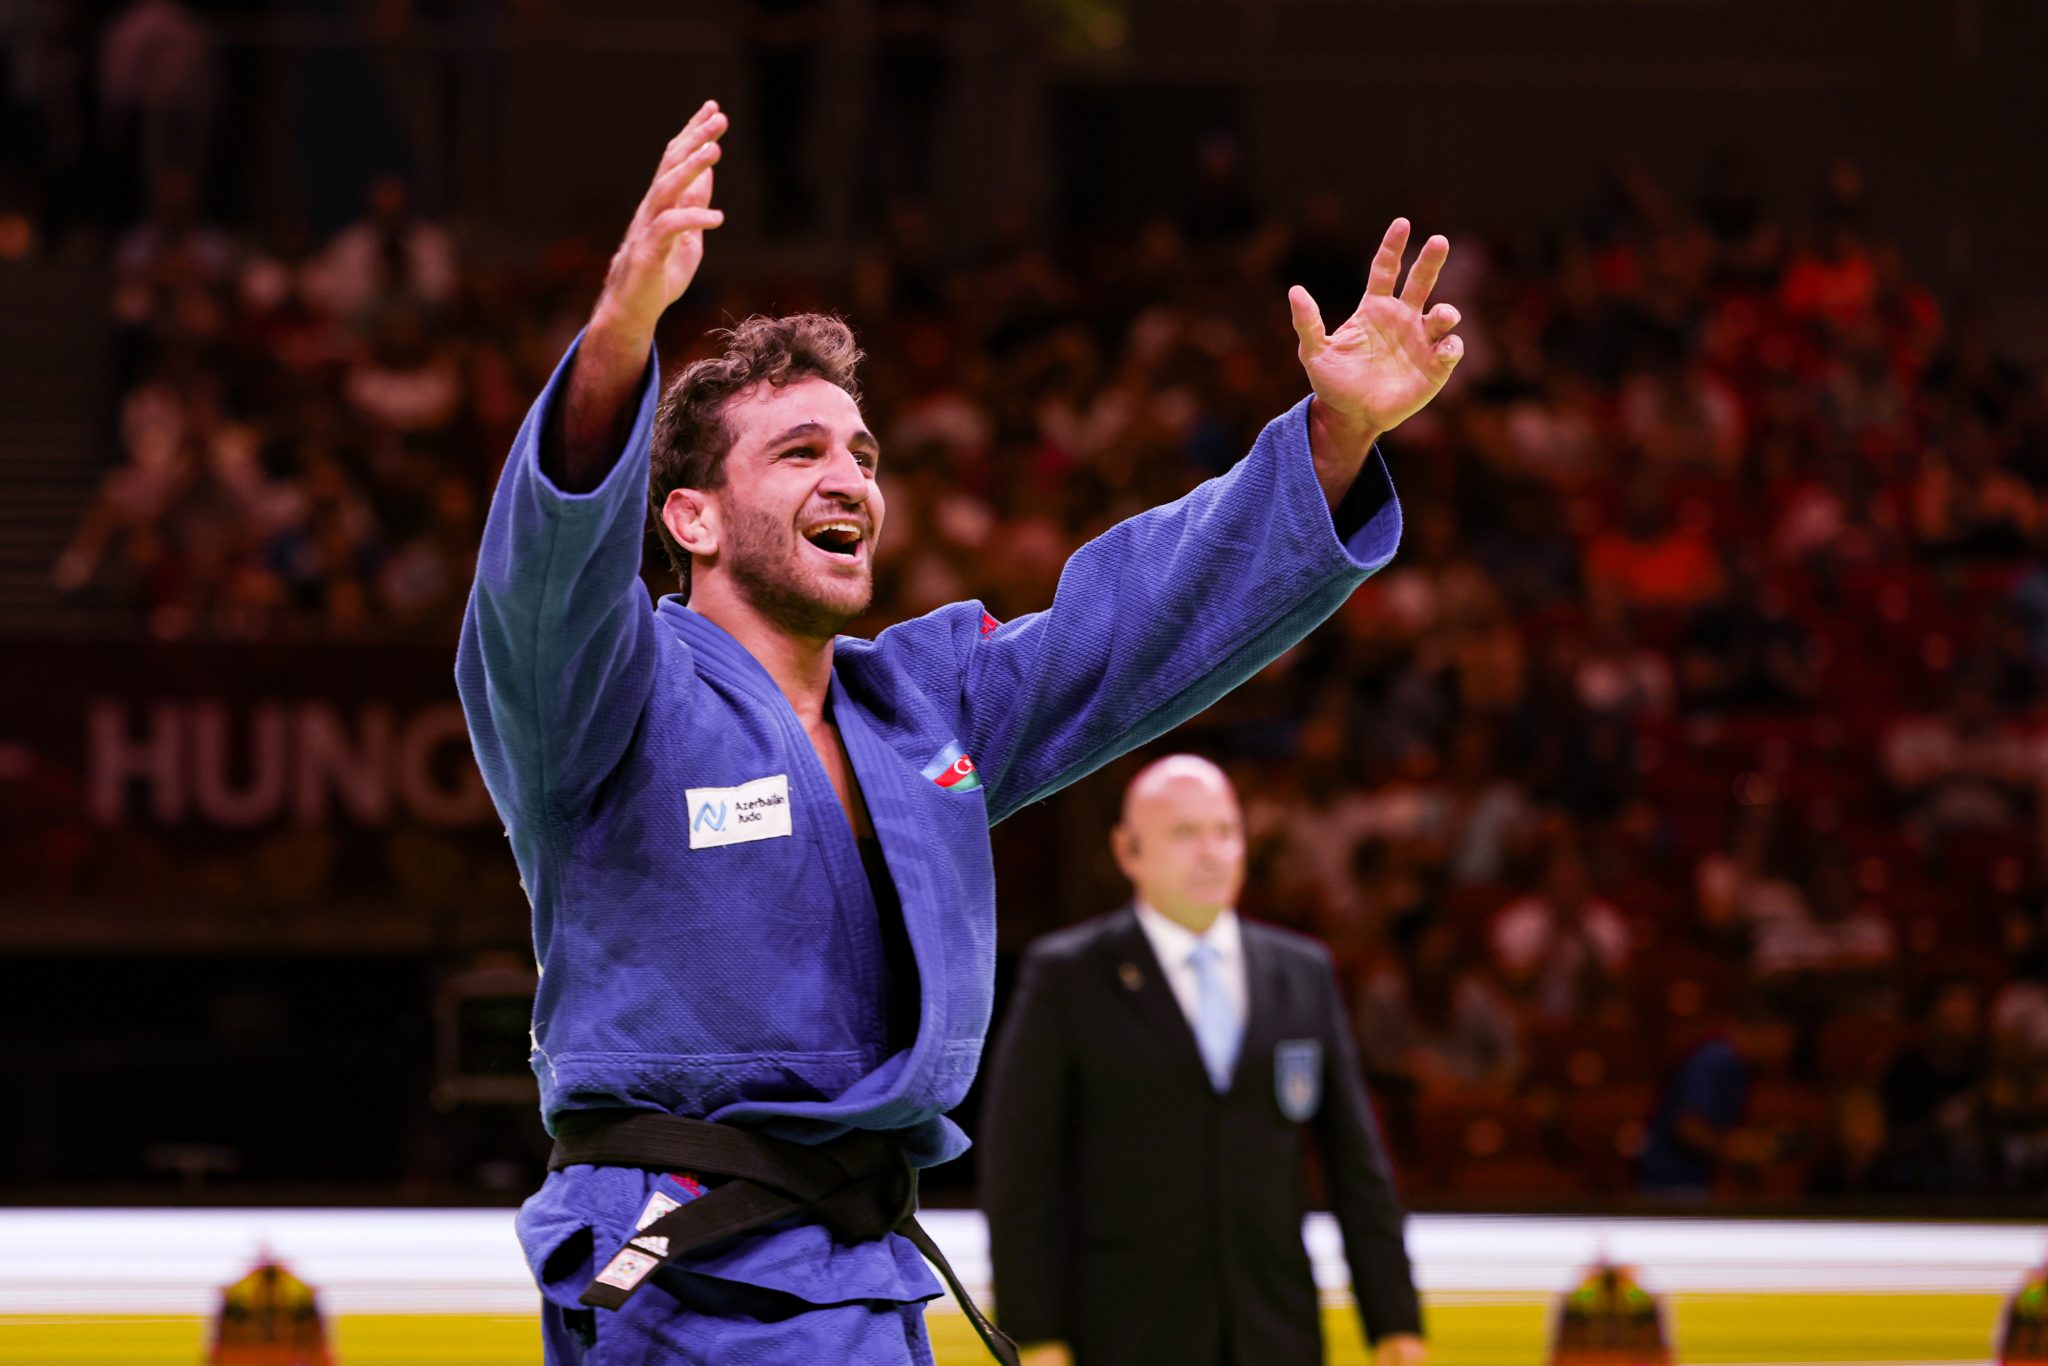 HEYDAROV TAKES EUROPE'S ONLY GOLD ON DAY TWO